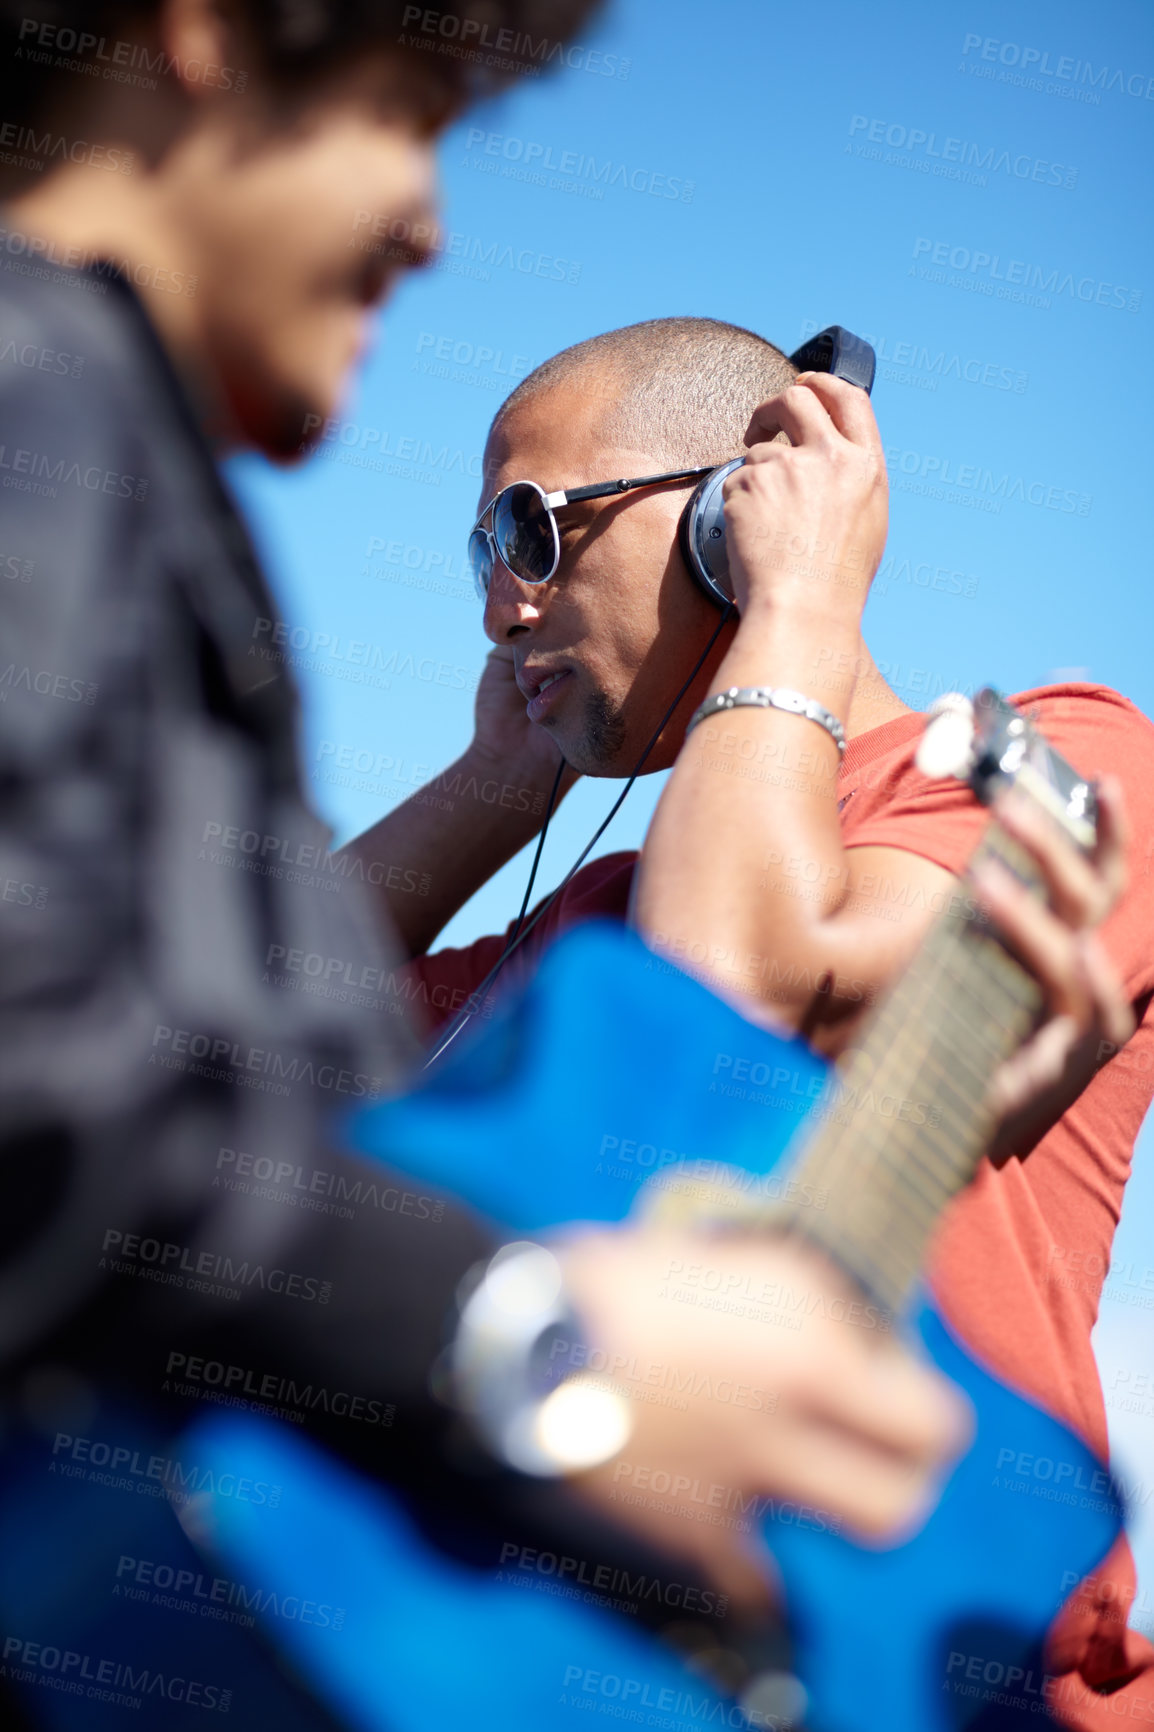 Buy stock photo Shot of a young man playing the guitar while his friend uses his his headphones